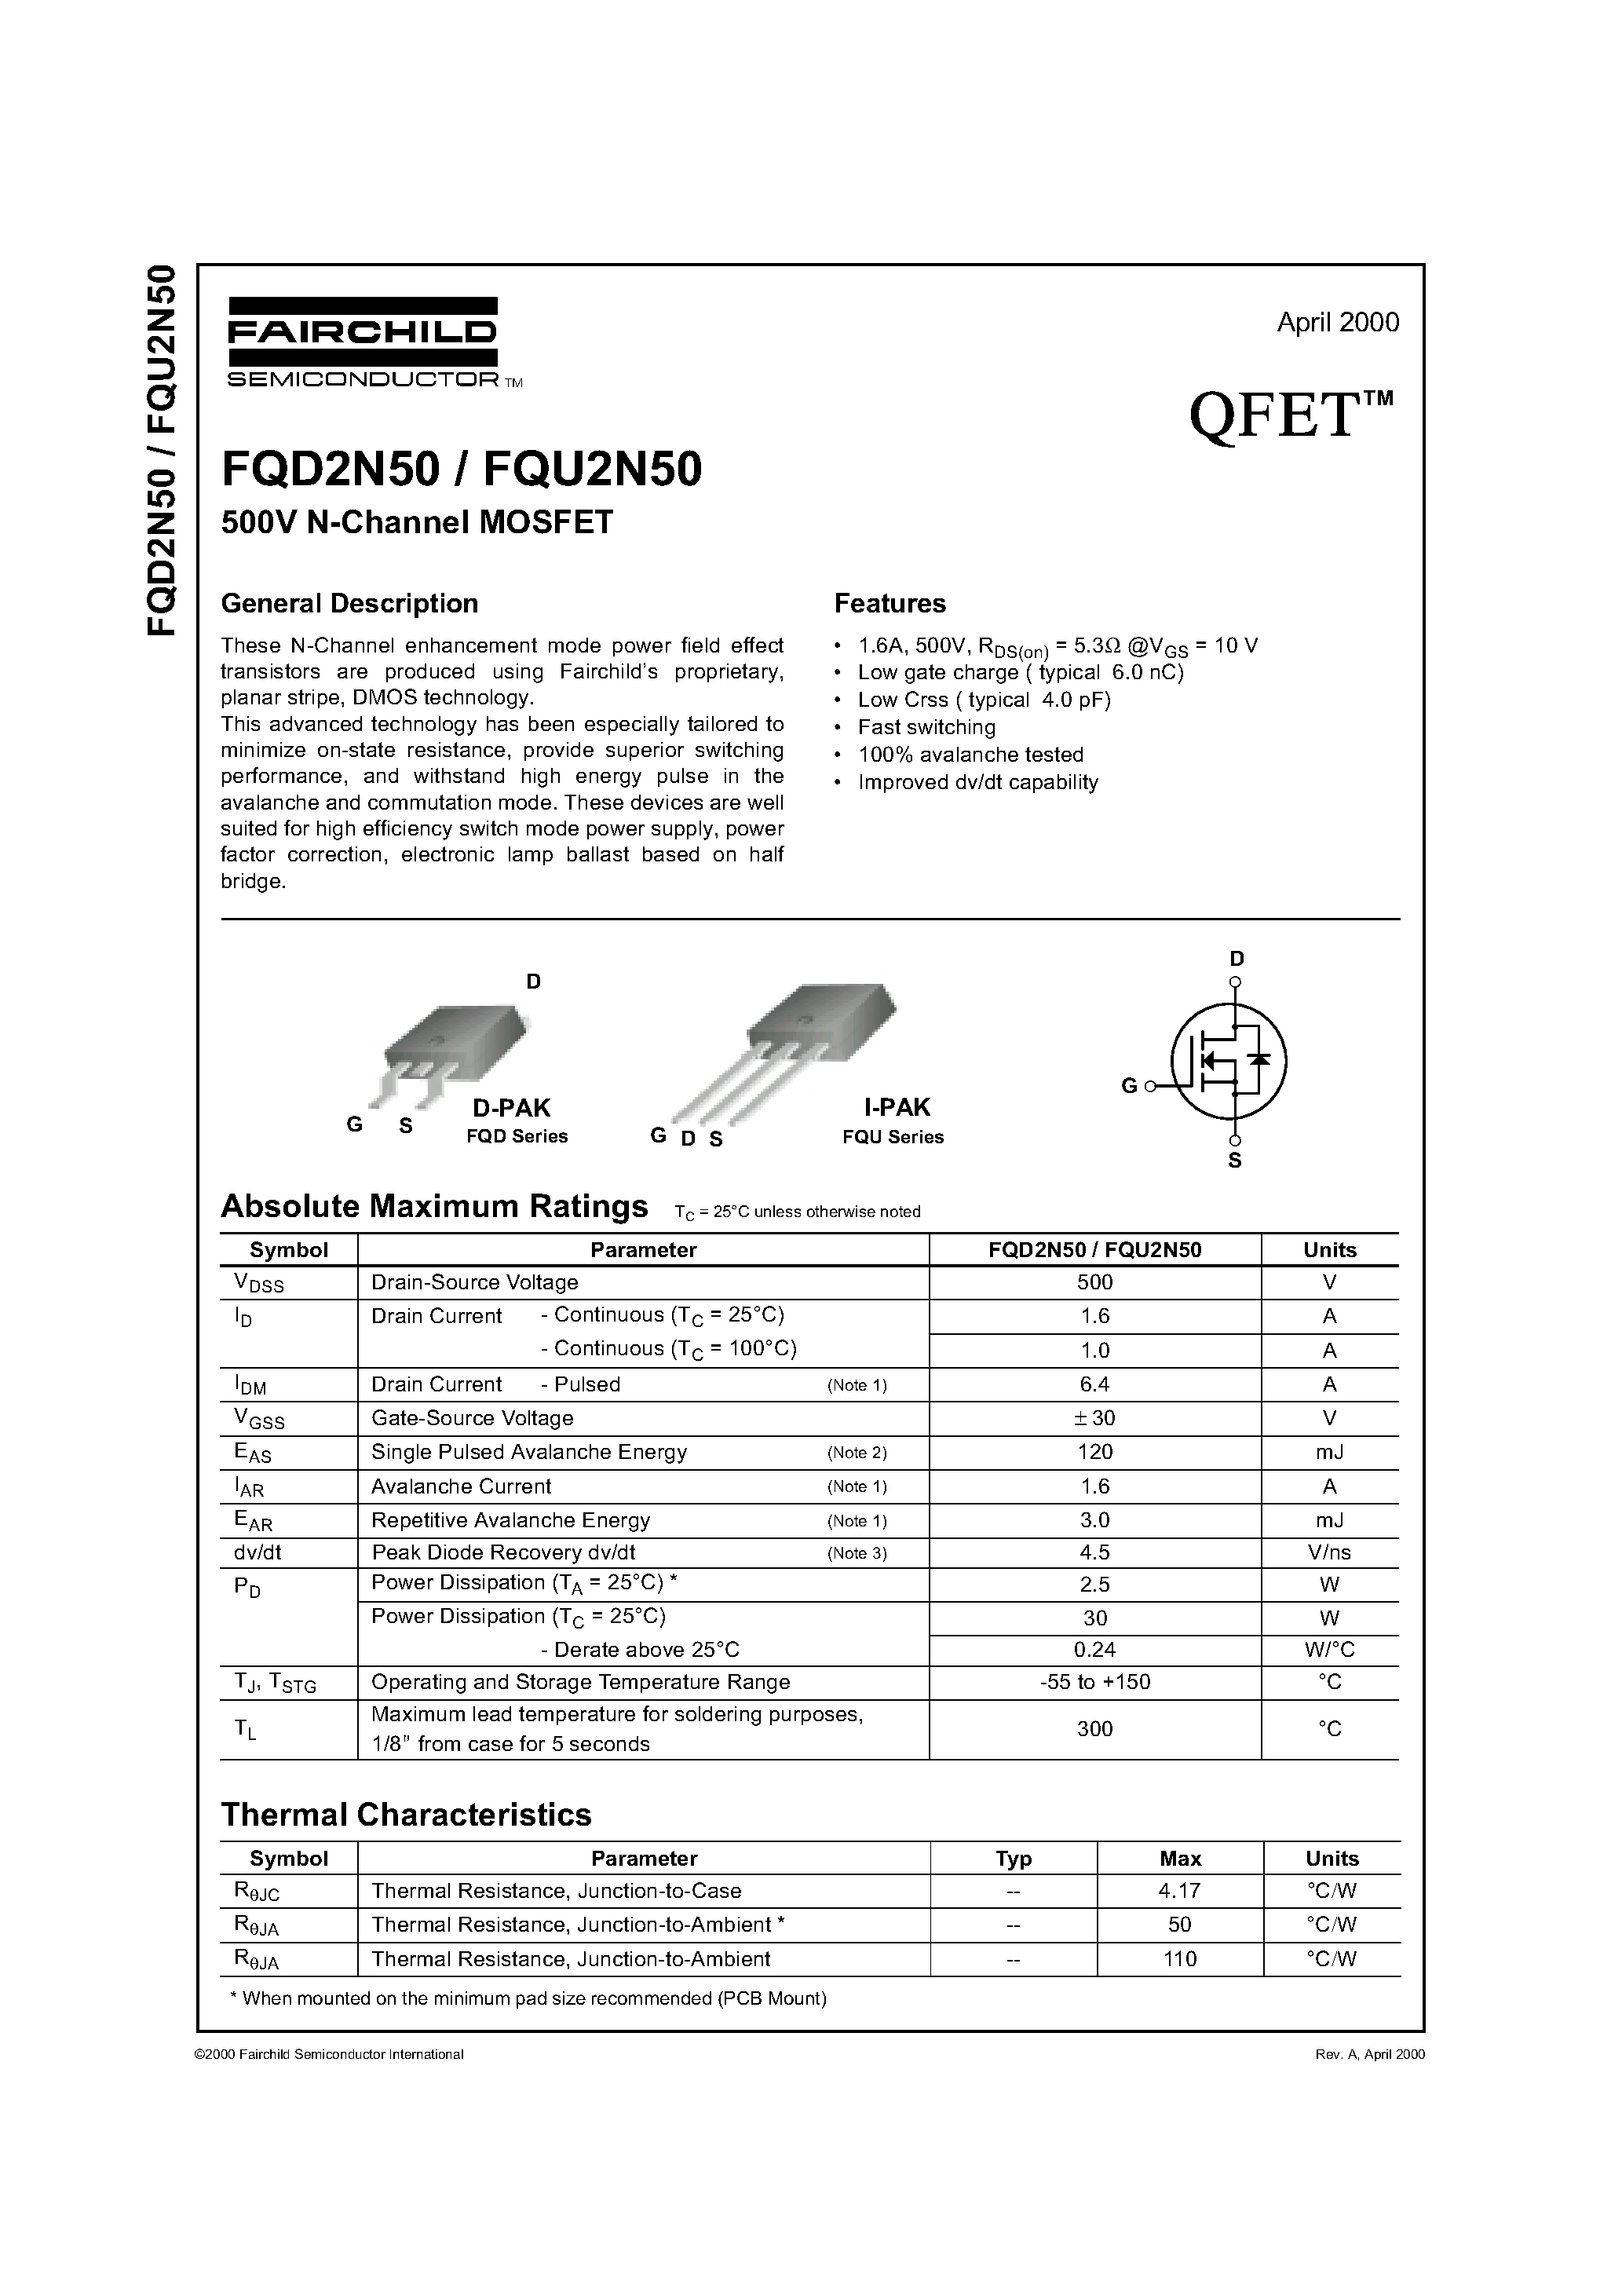 Datasheet FQD2N50 - 500V N-Channel MOSFET page 1